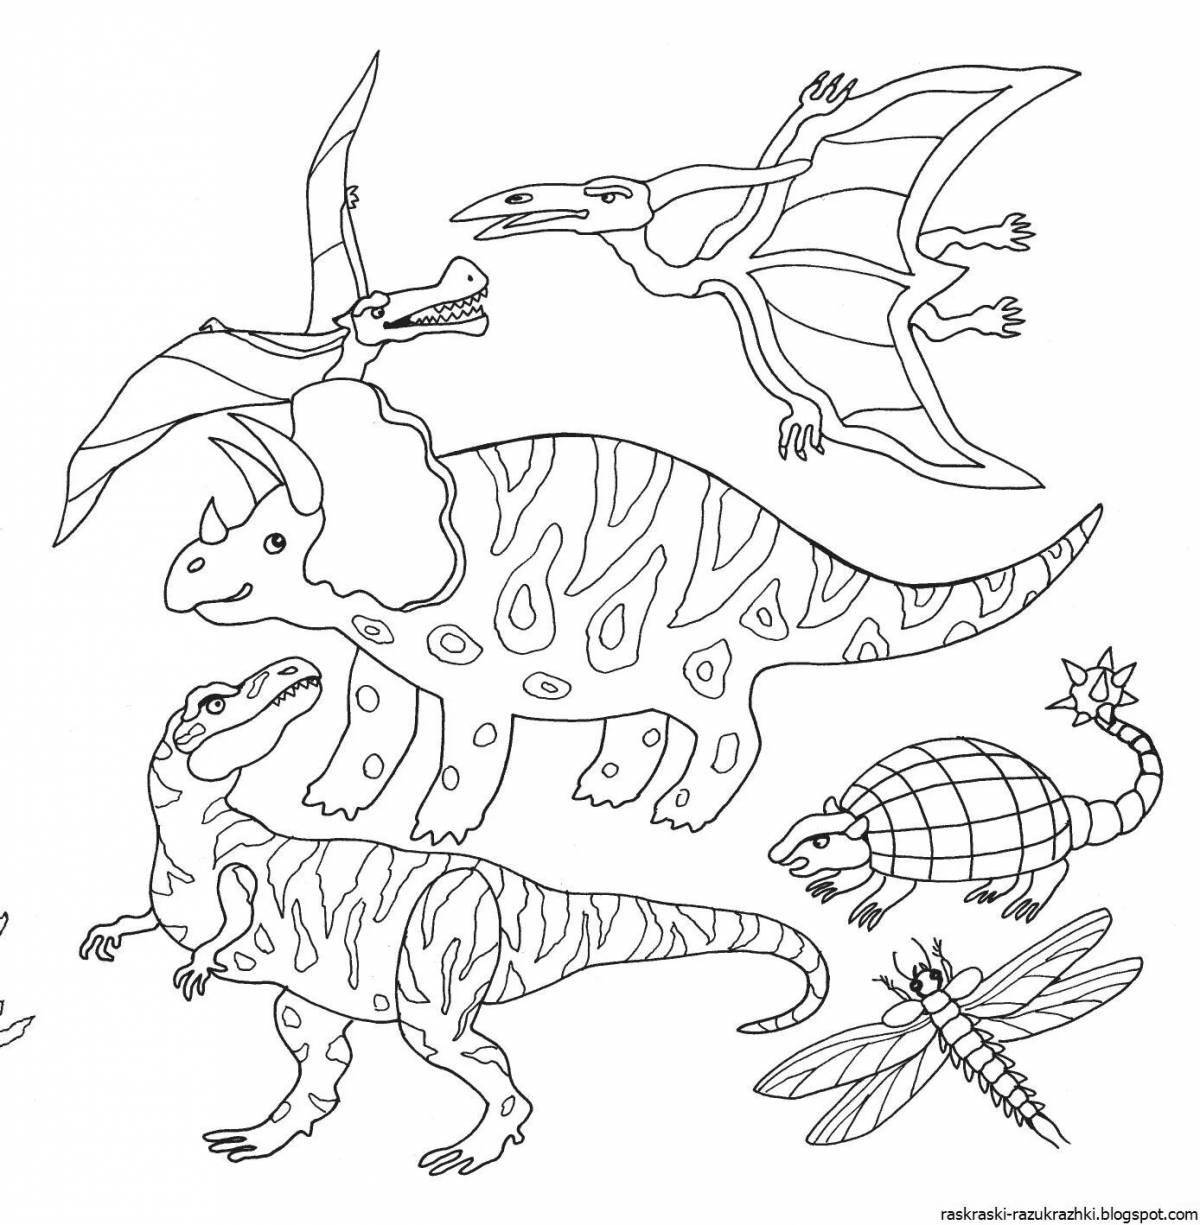 Wonderful dinosaur coloring for children 7 years old